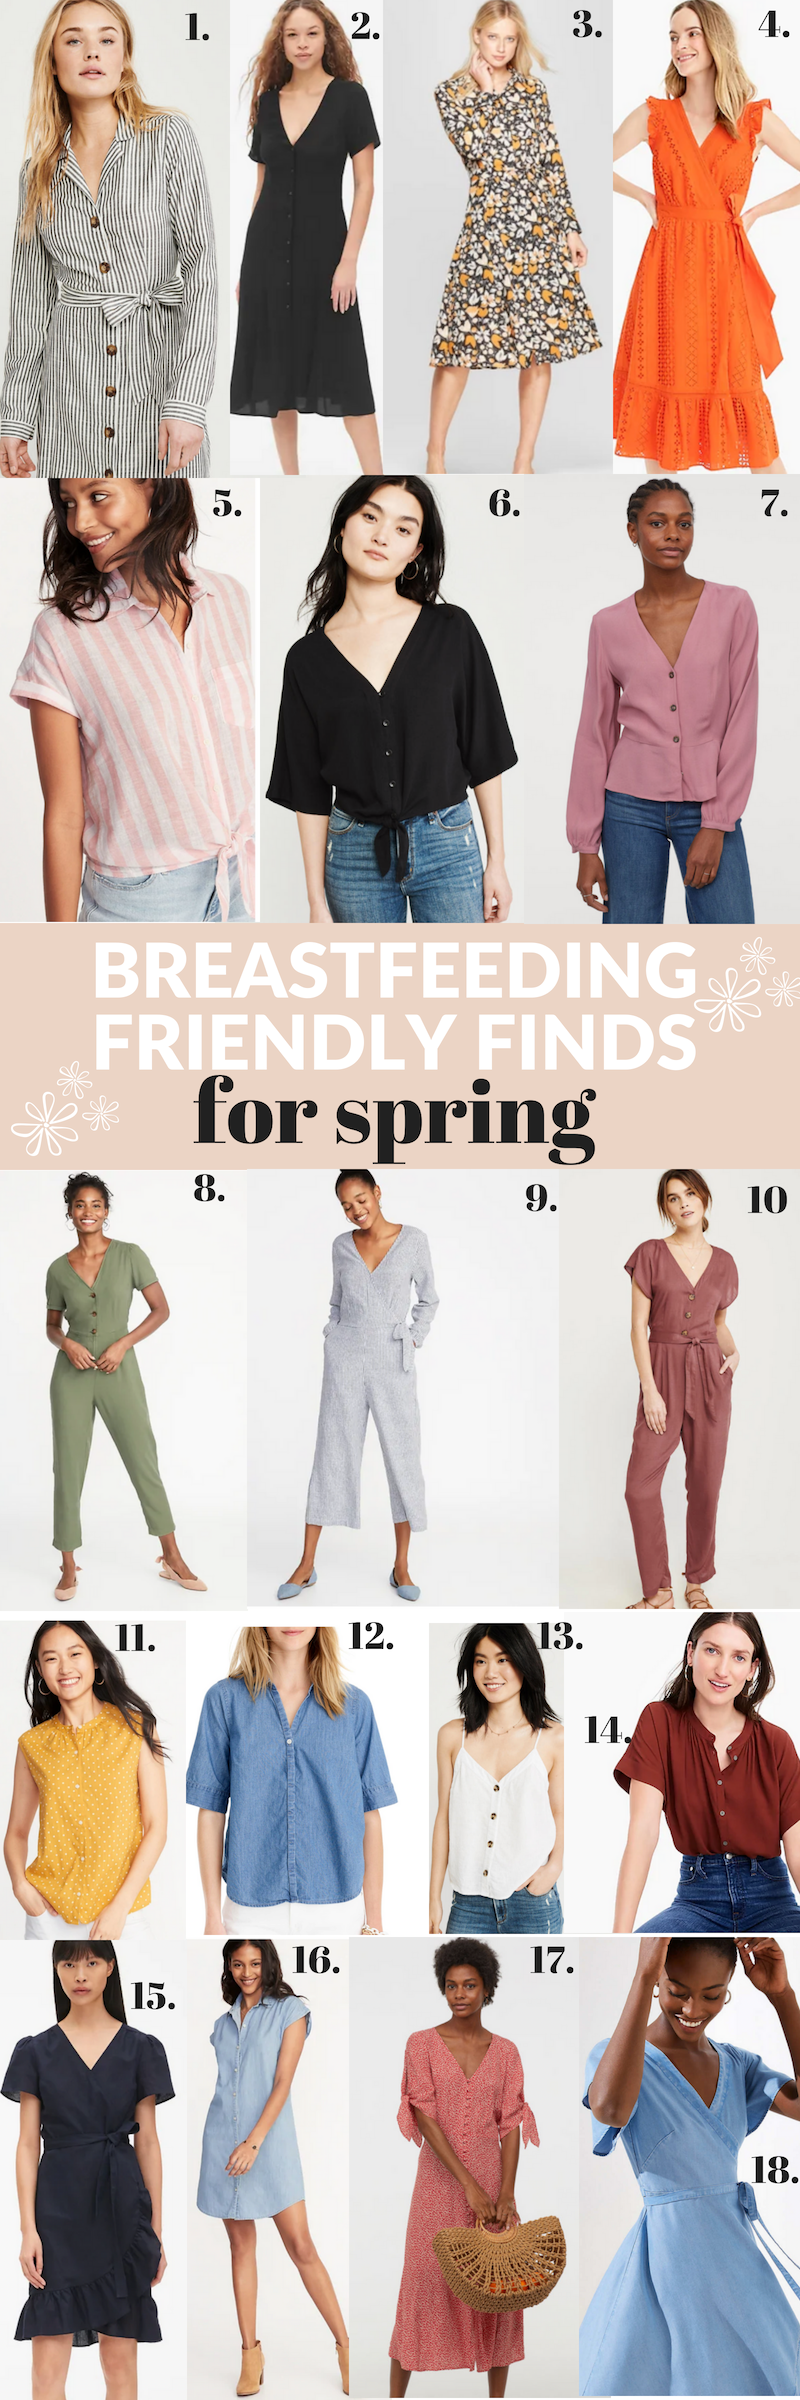 https://themamanotes.com/wp-content/uploads/2019/03/breast-feeding-friendly-finds-for-spring.png